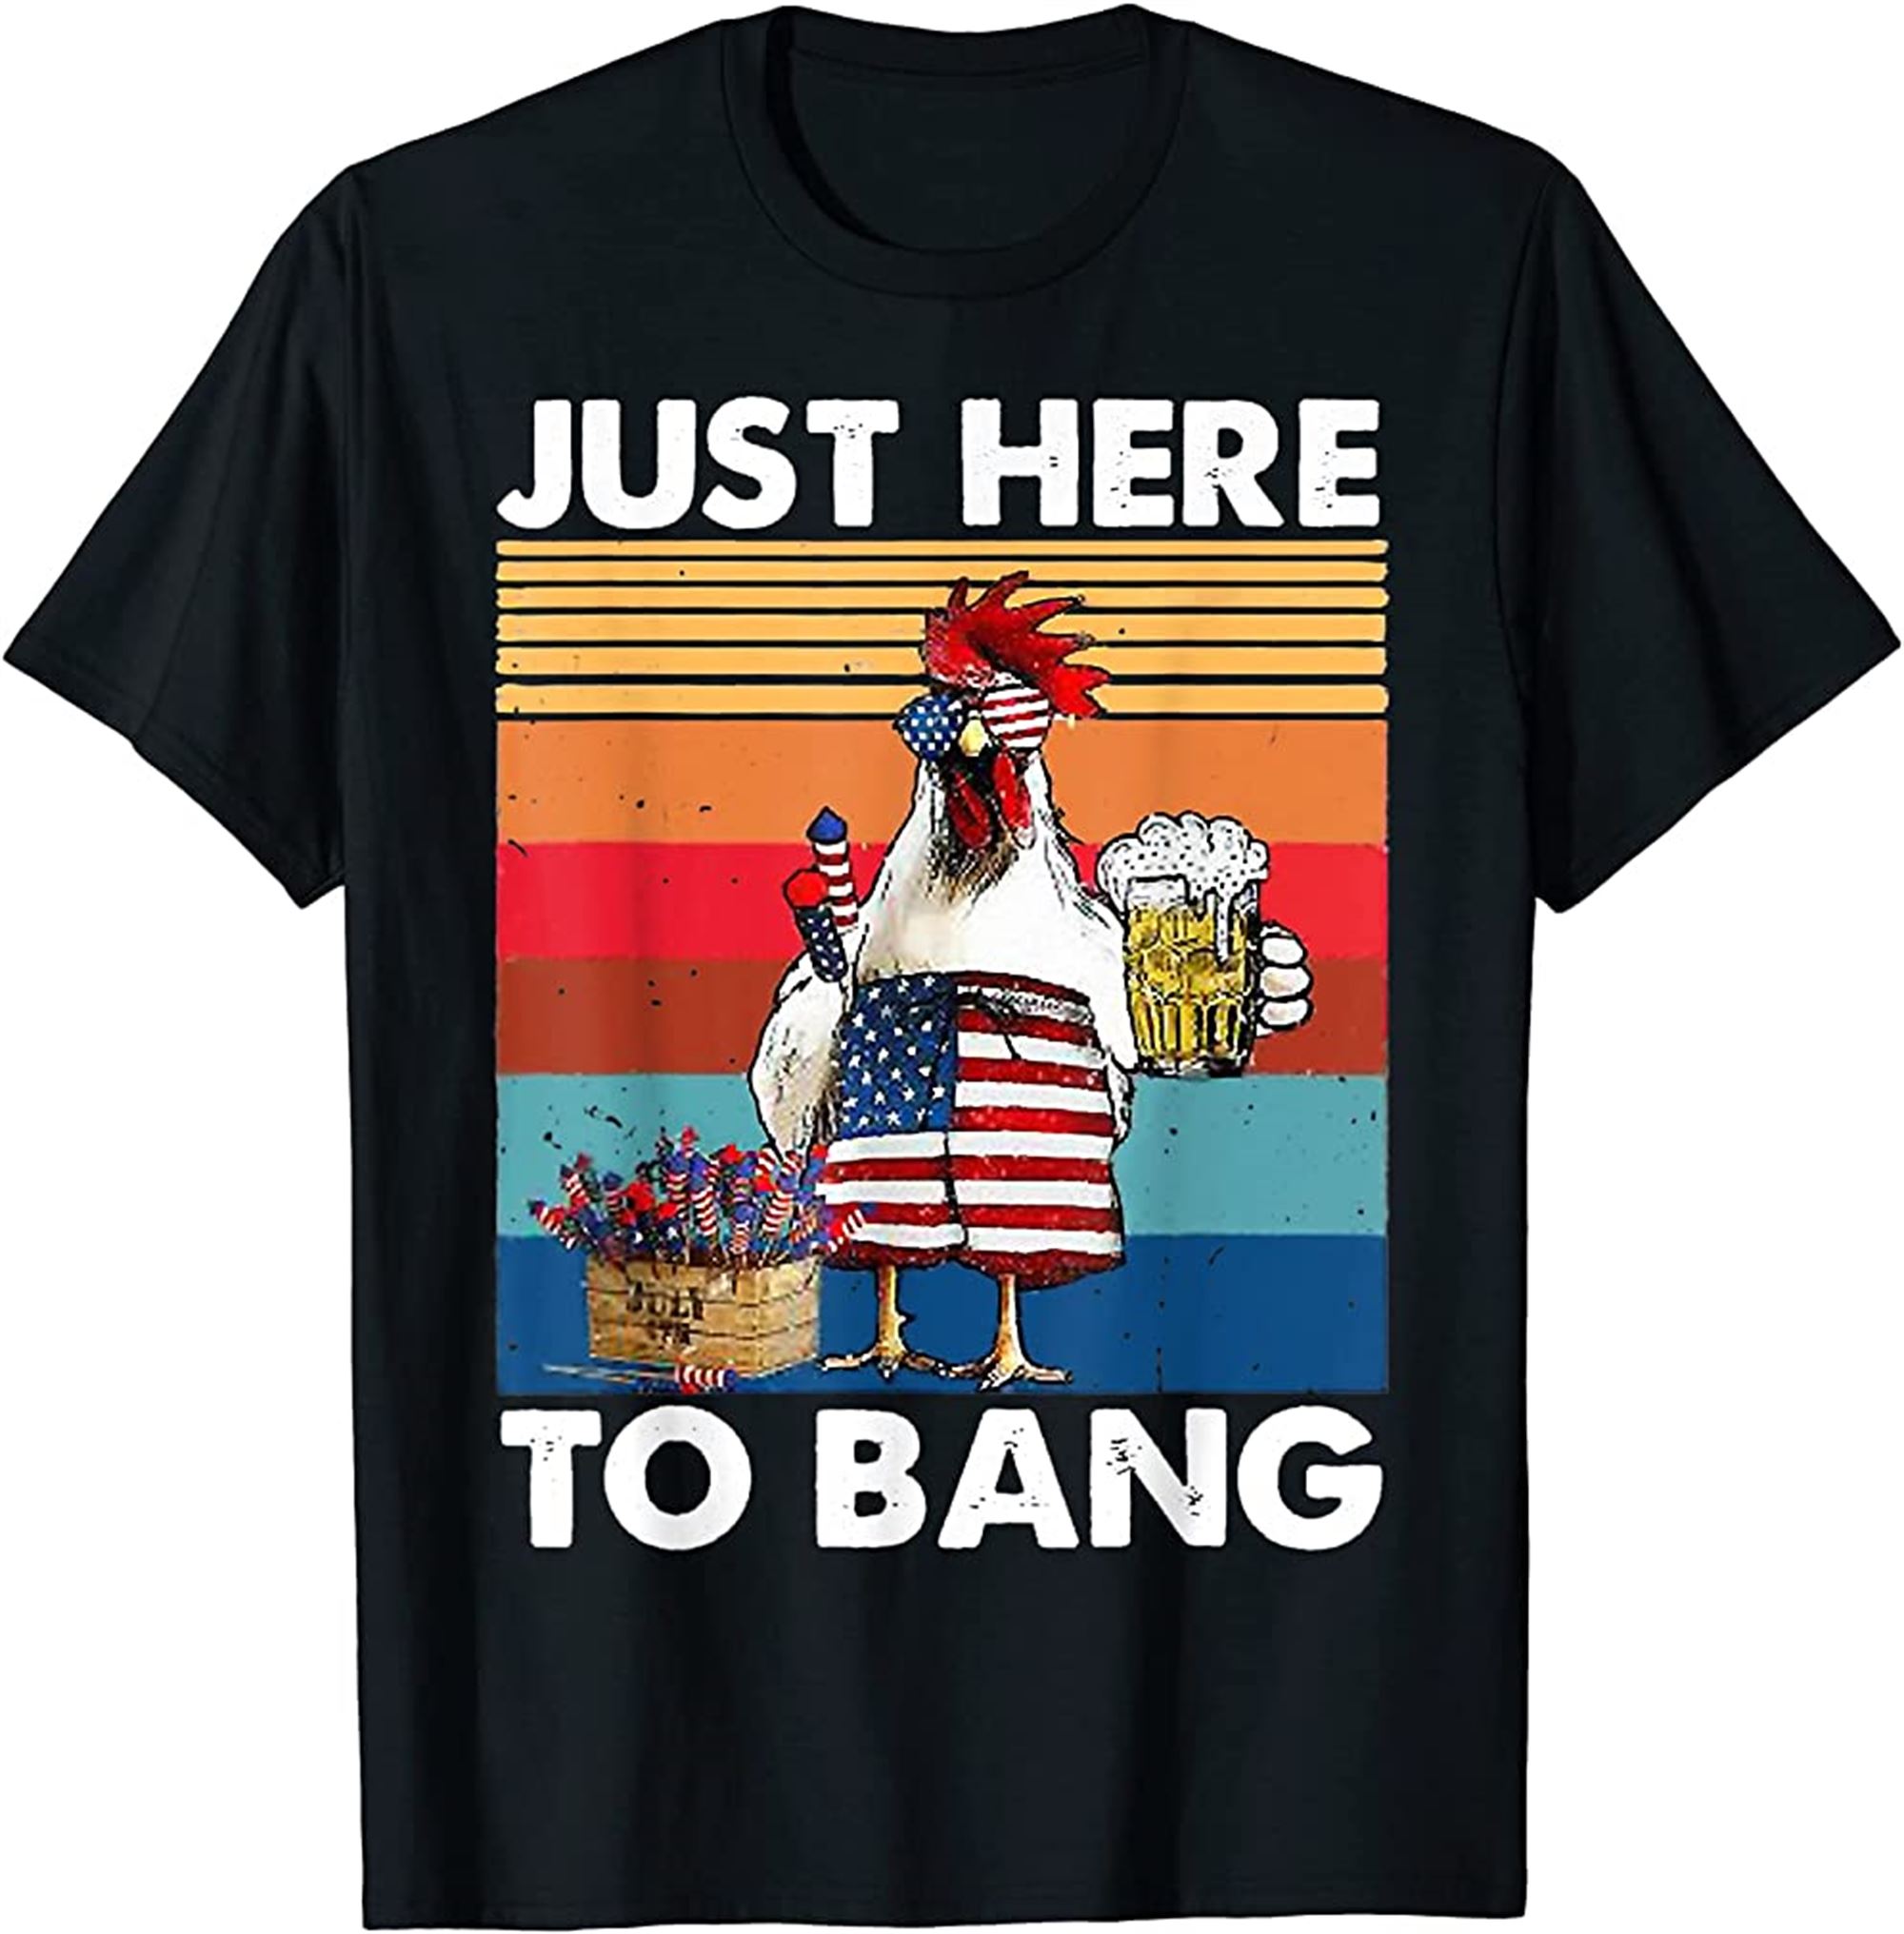 Just Here To Bang Usa Flag Chicken Beer Firework 4th Of July T-shirt Full Size Up To 5xl